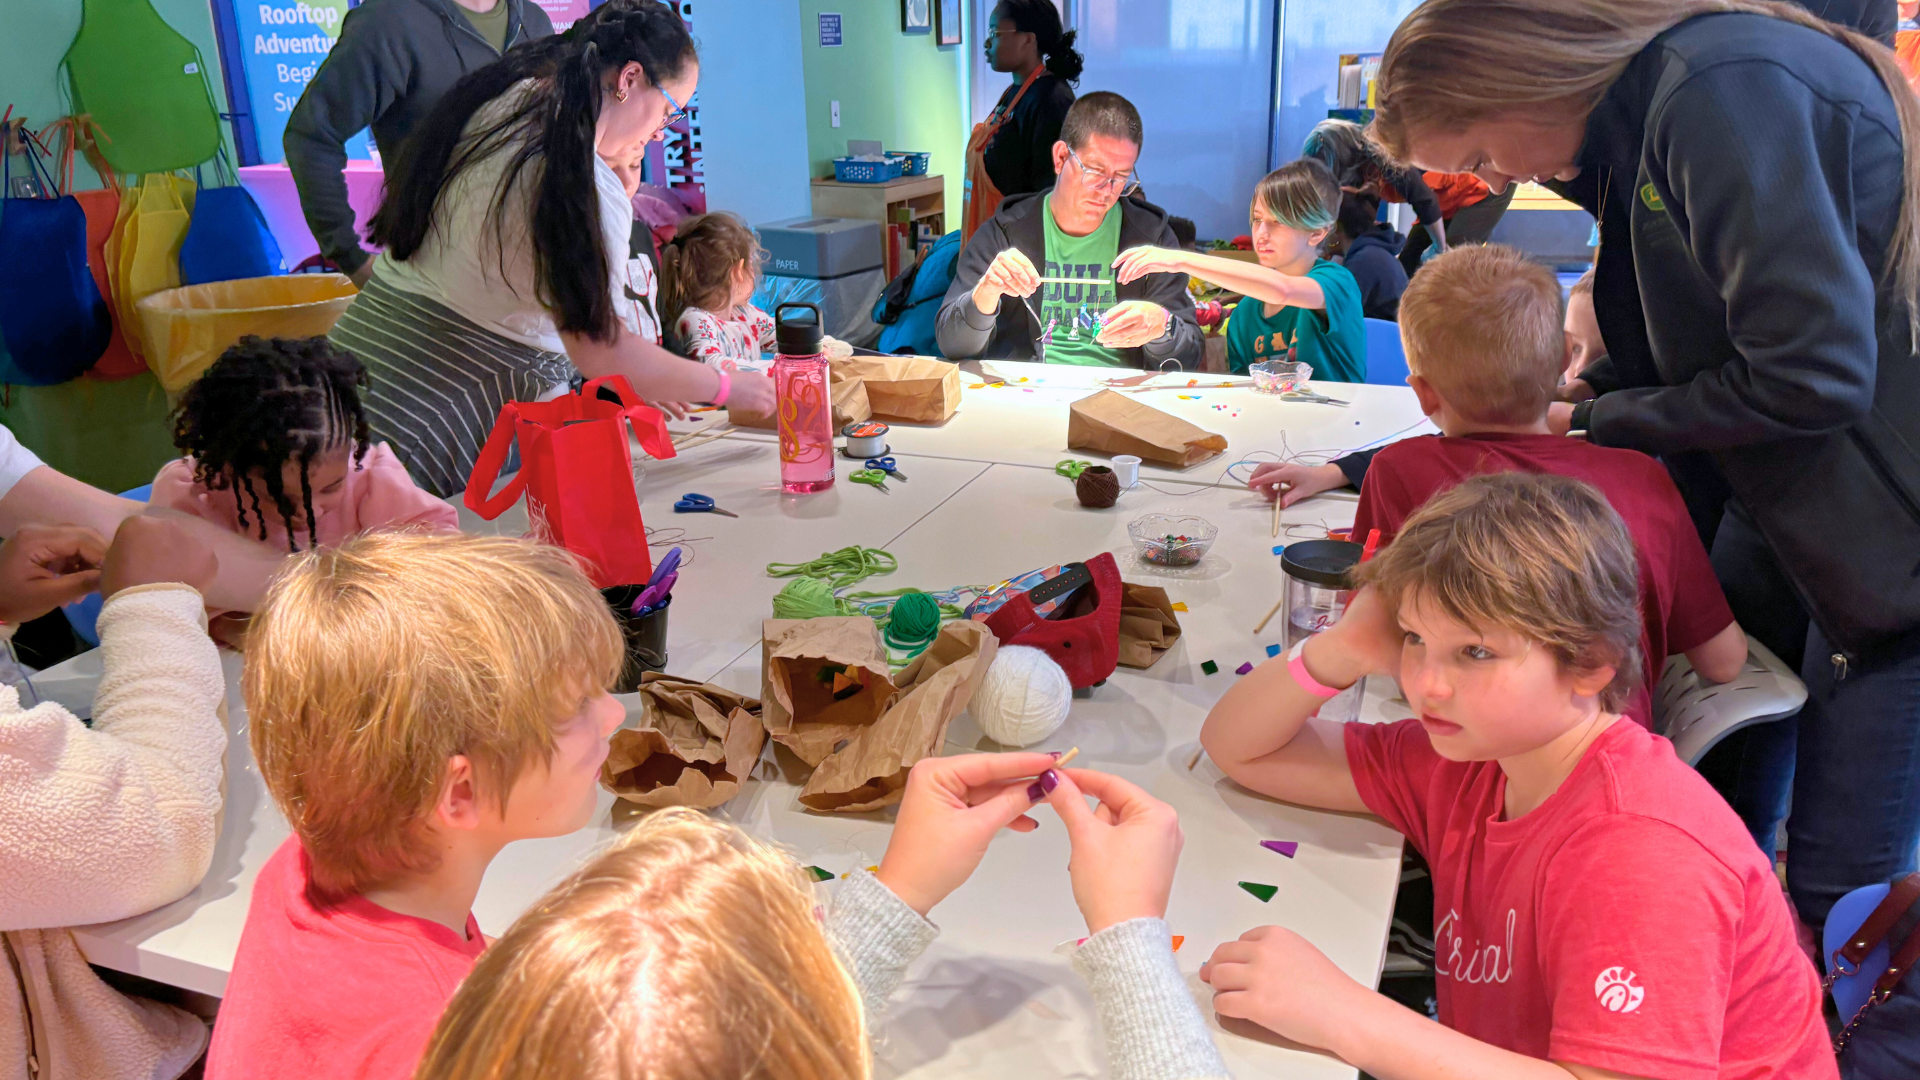 Children and parents building in a maker space